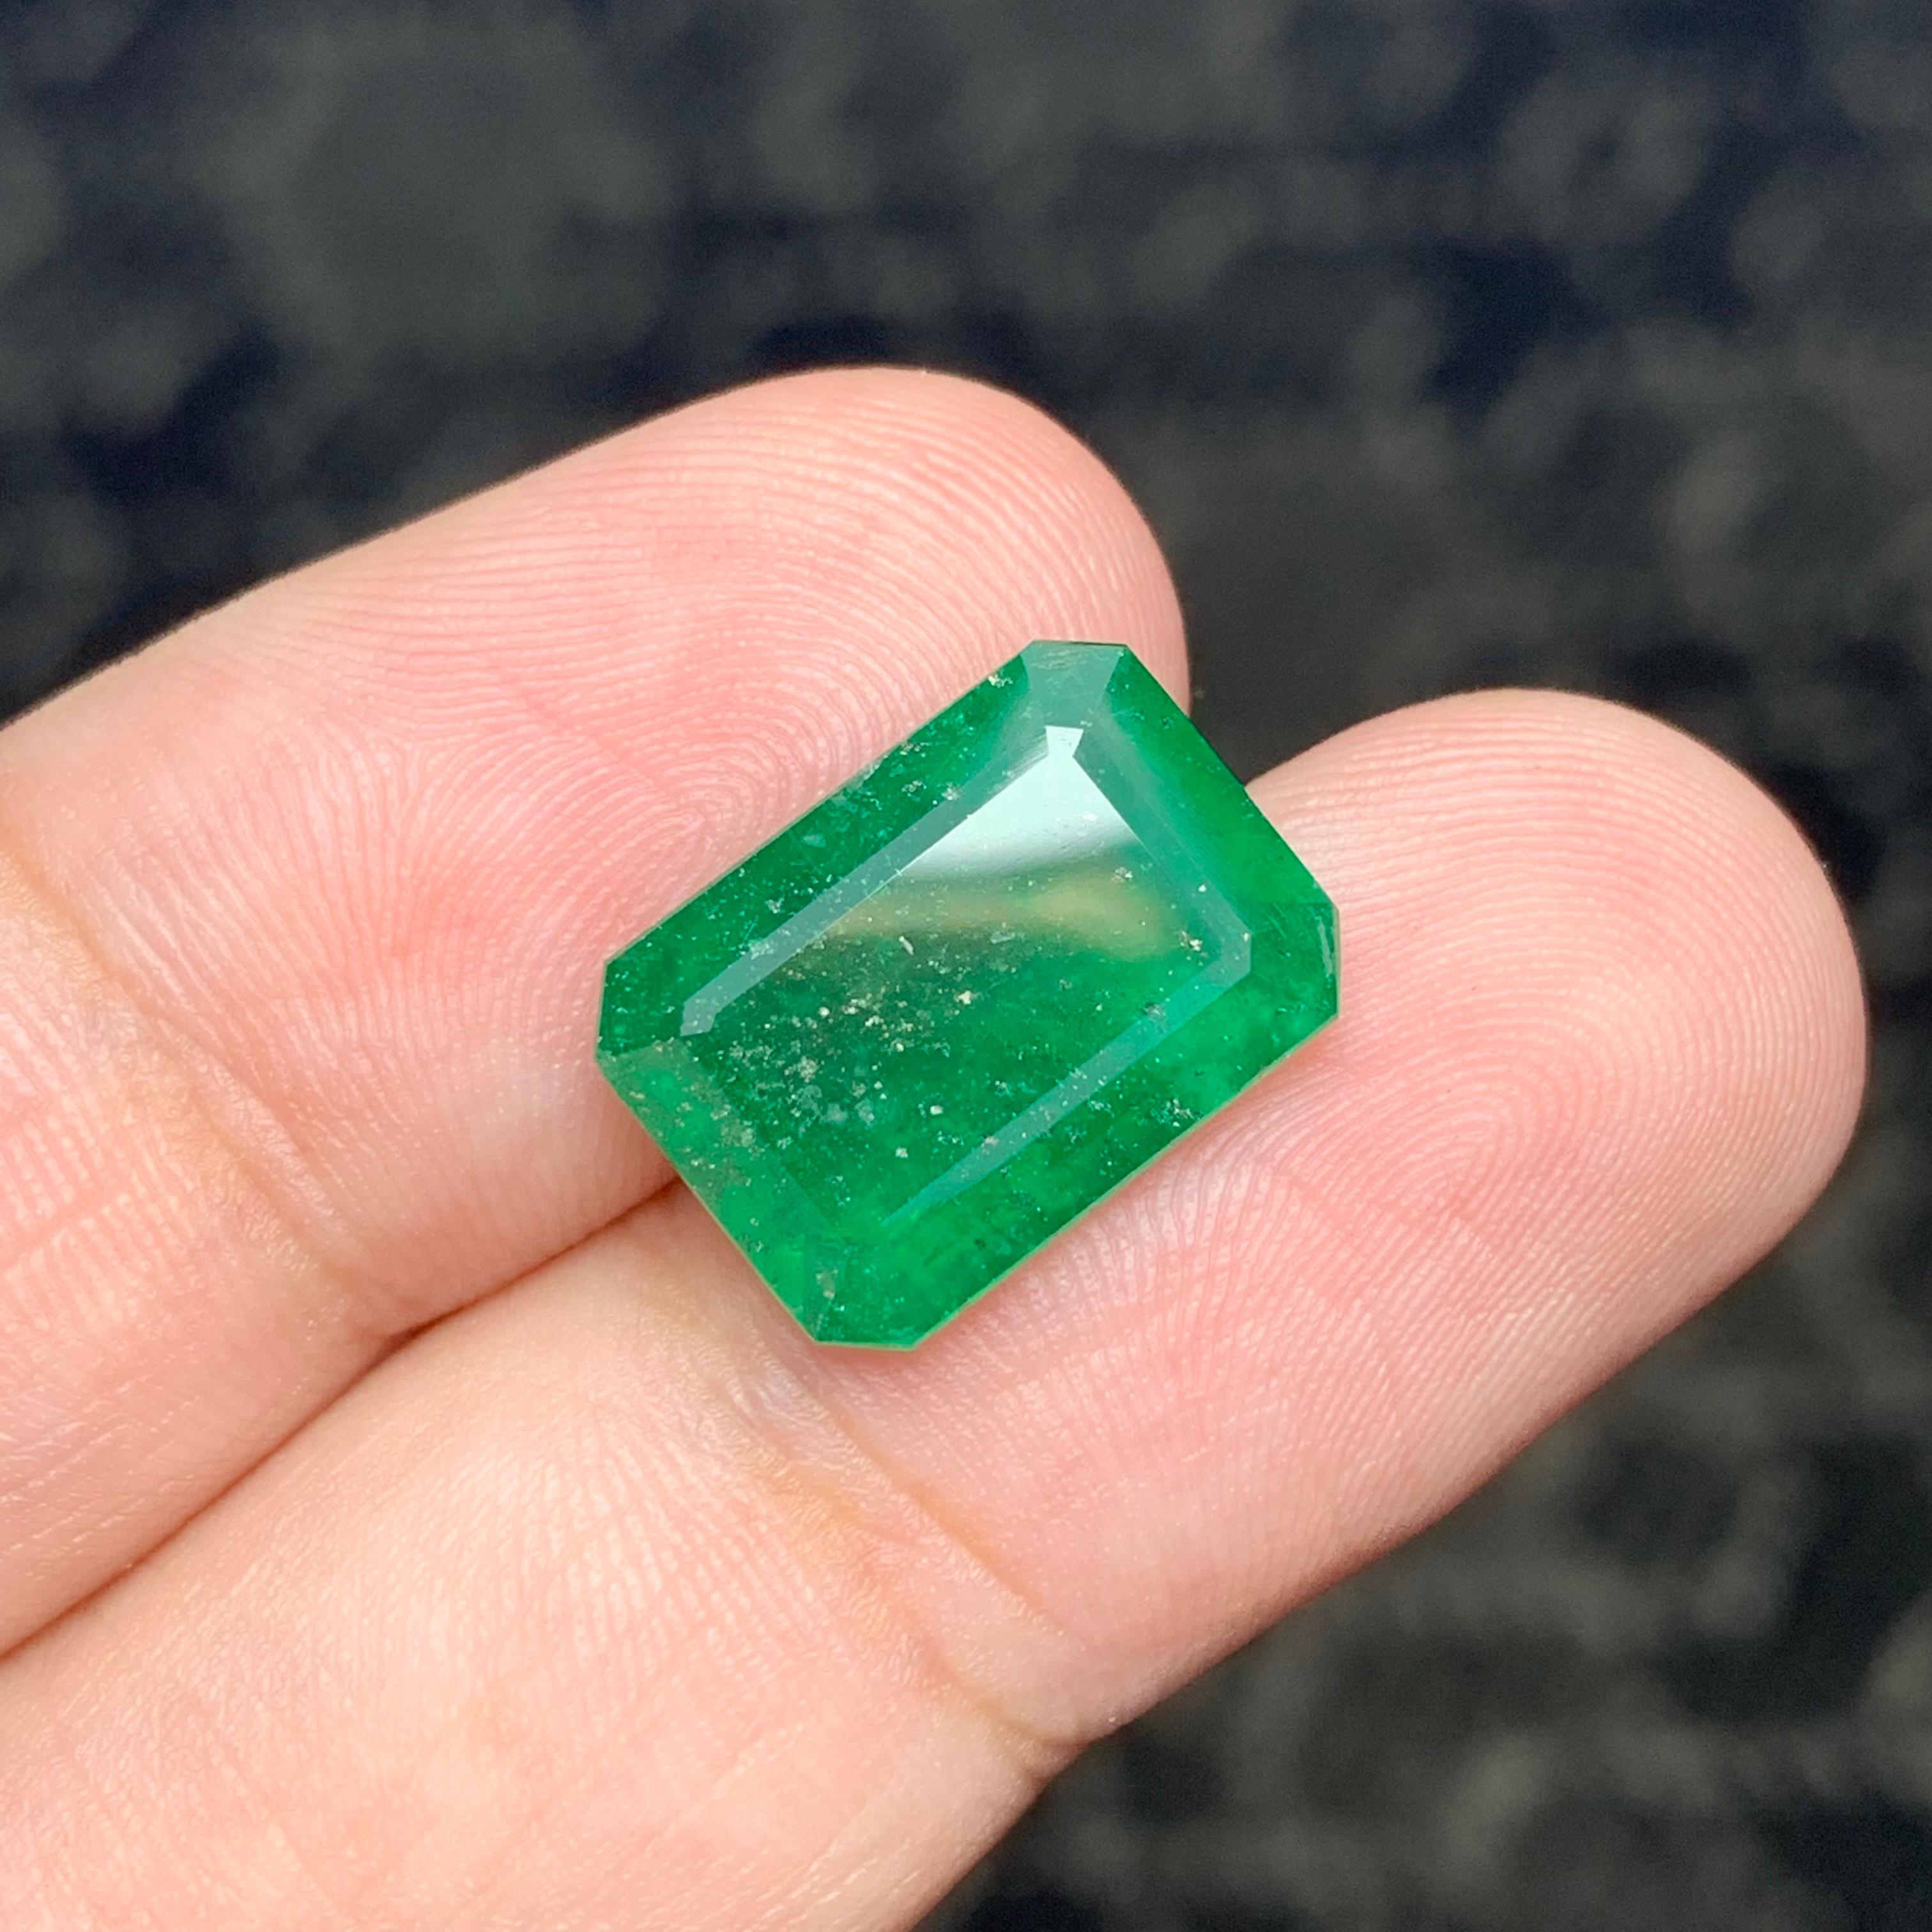 Loose Emerald
Weight: 5.75 Carats
Dimensions: 14.5 x 10.6 x 5.2 Mm
Origin: Swat Pakistan
Shape: Emerald
Color: Green
Treatment: Non
Certificate: On Demand

The Swat Emerald, also known as the Mingora Emerald, is a rare and highly prized gemstone